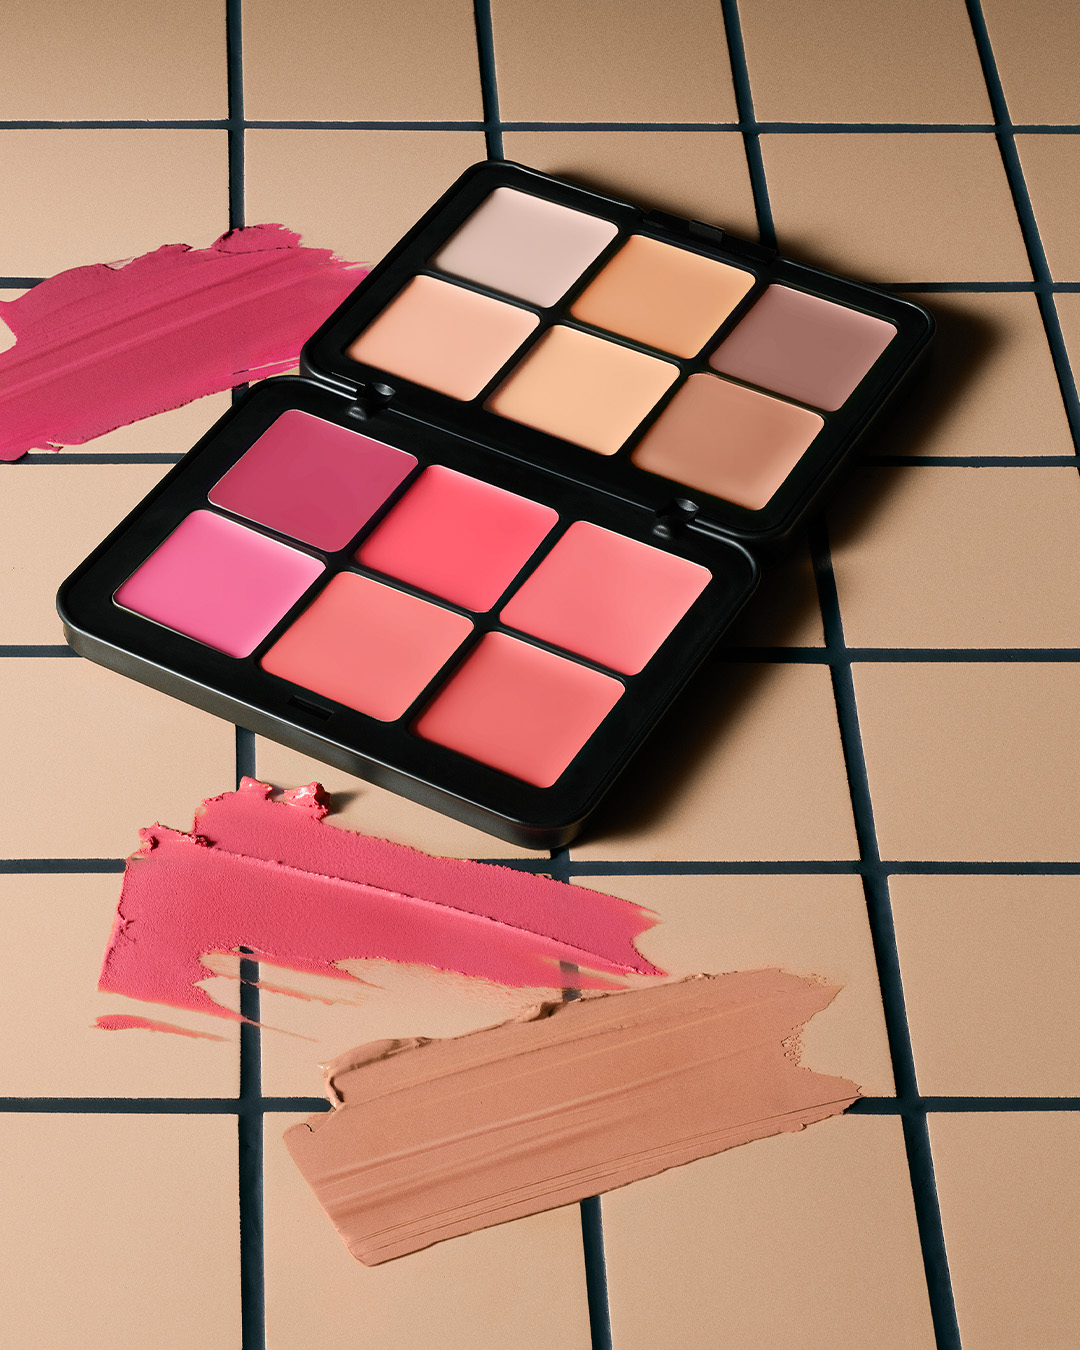 Ultra HD Blush Palette by MAKE UP FOR EVER, 12 Shades